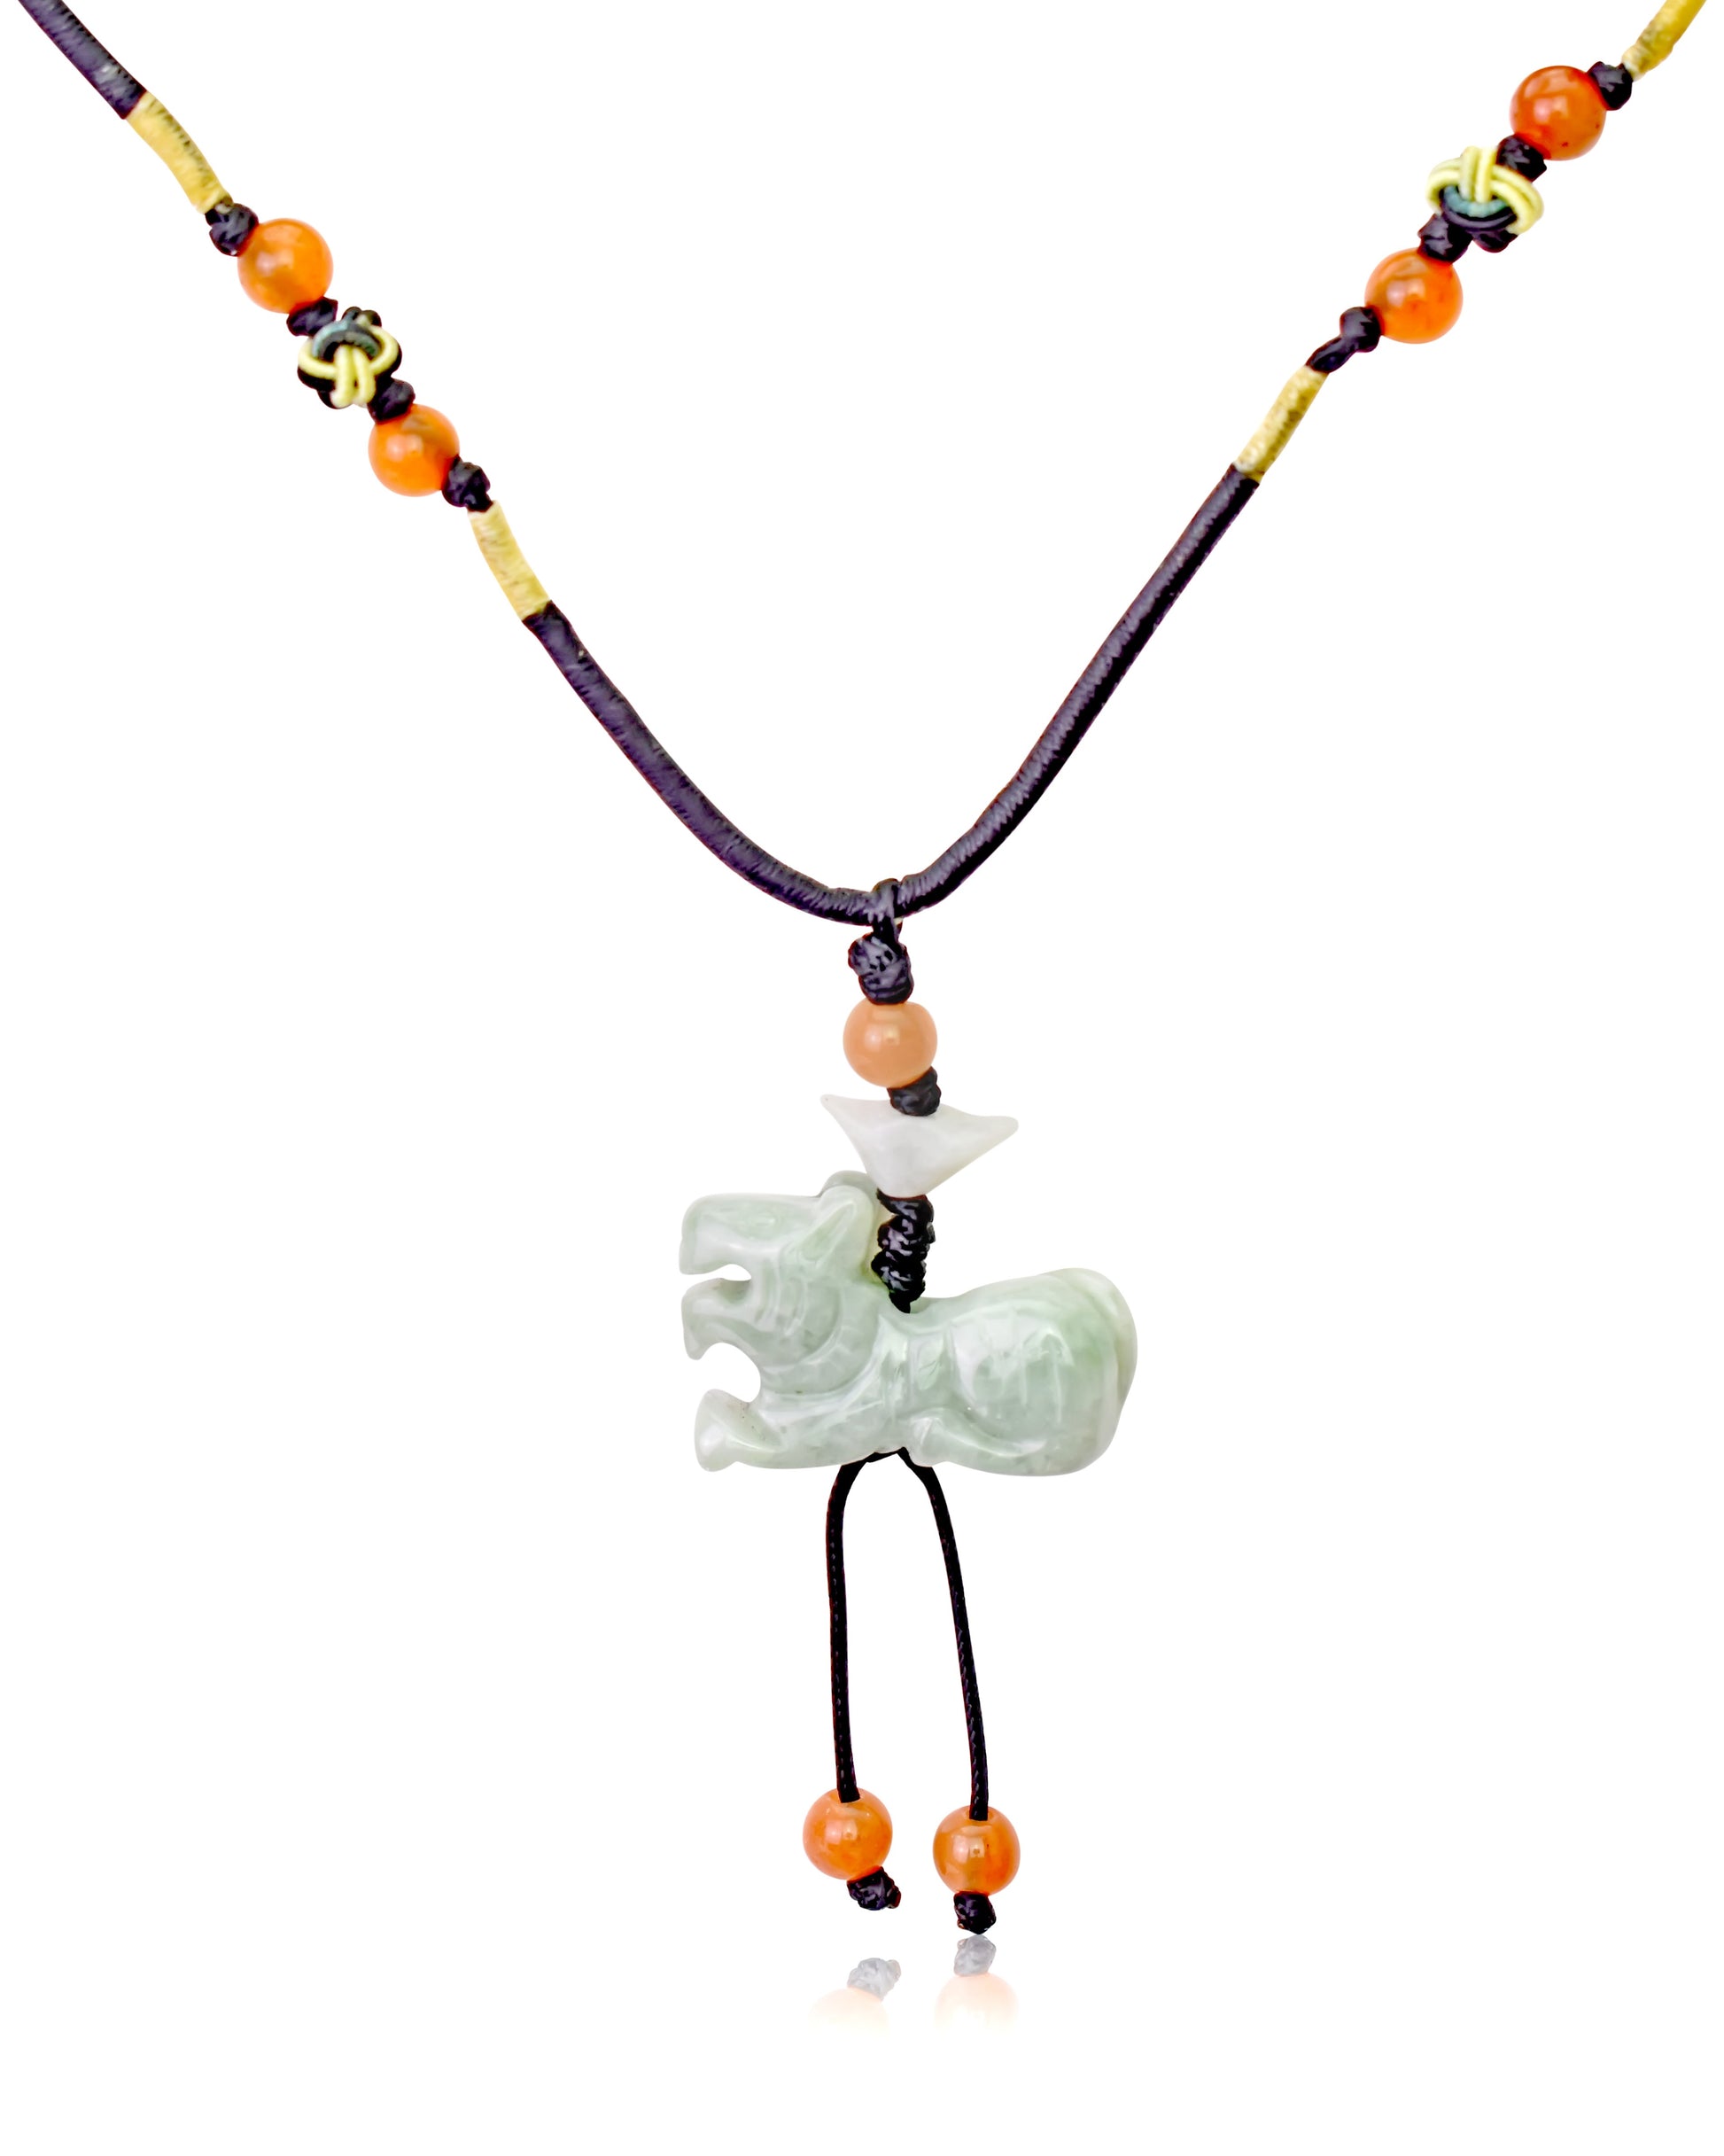 Get Your Symbol of Strength: The Tiger Chinese Zodiac Jade Necklace